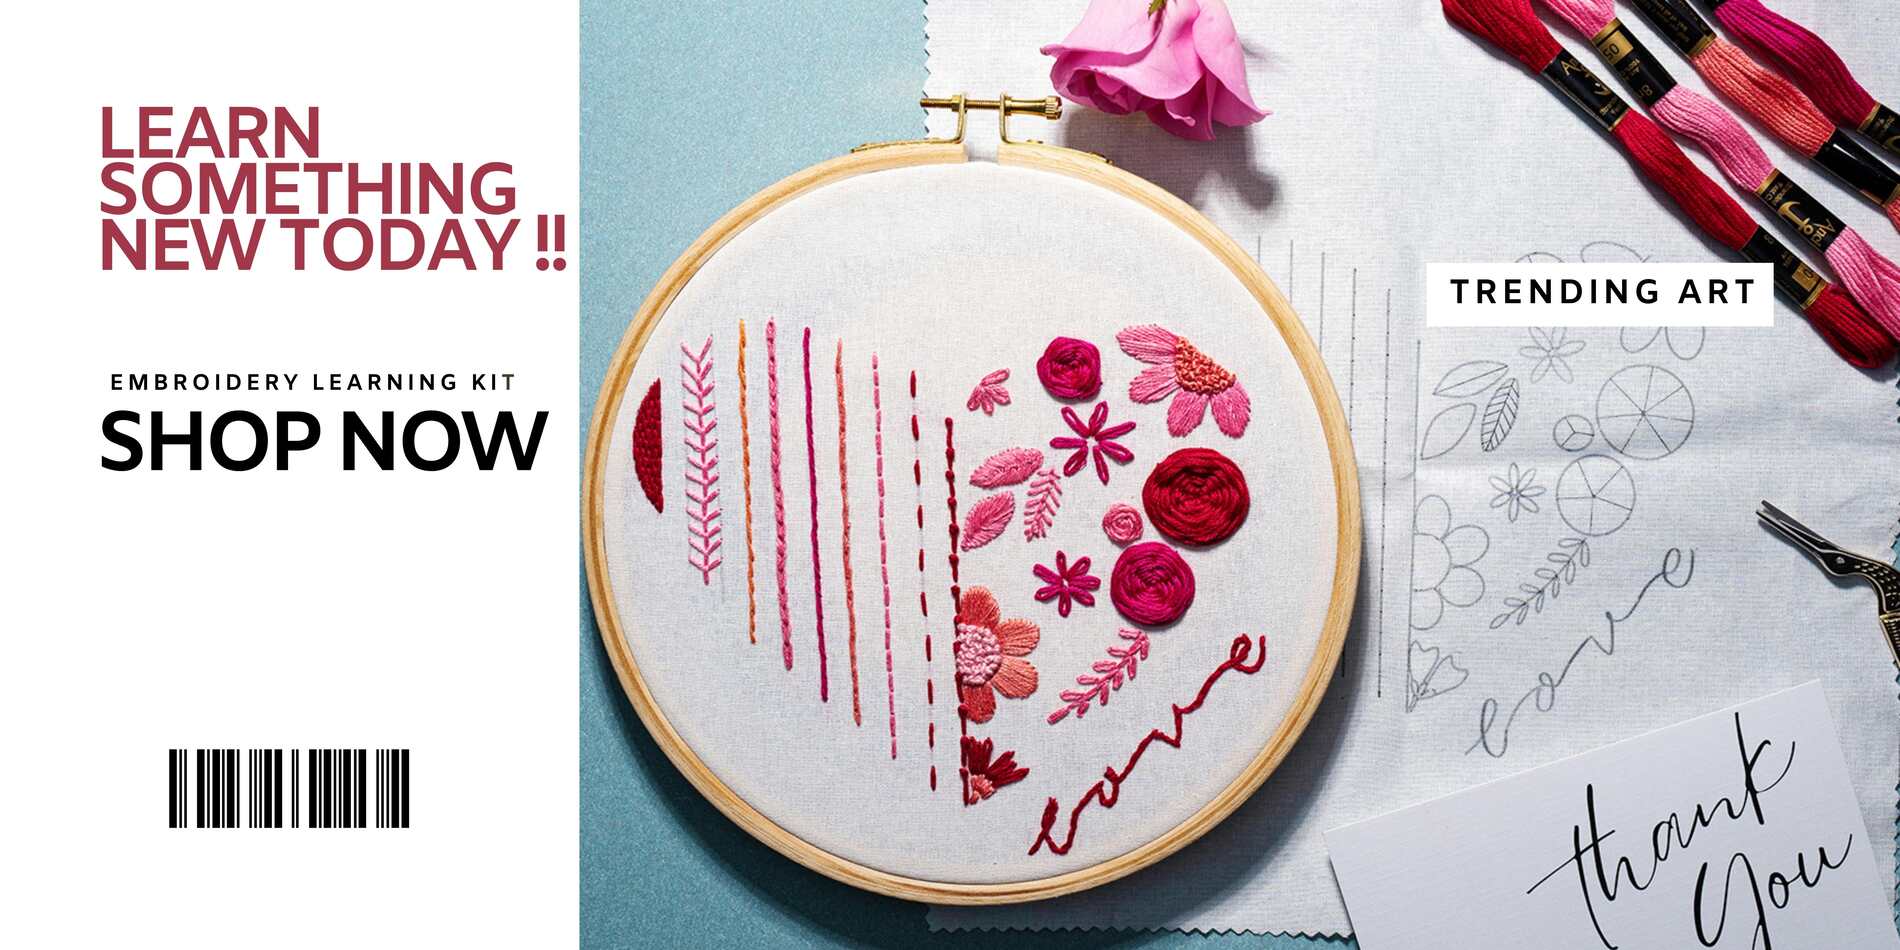 Embroidery Learning Kit